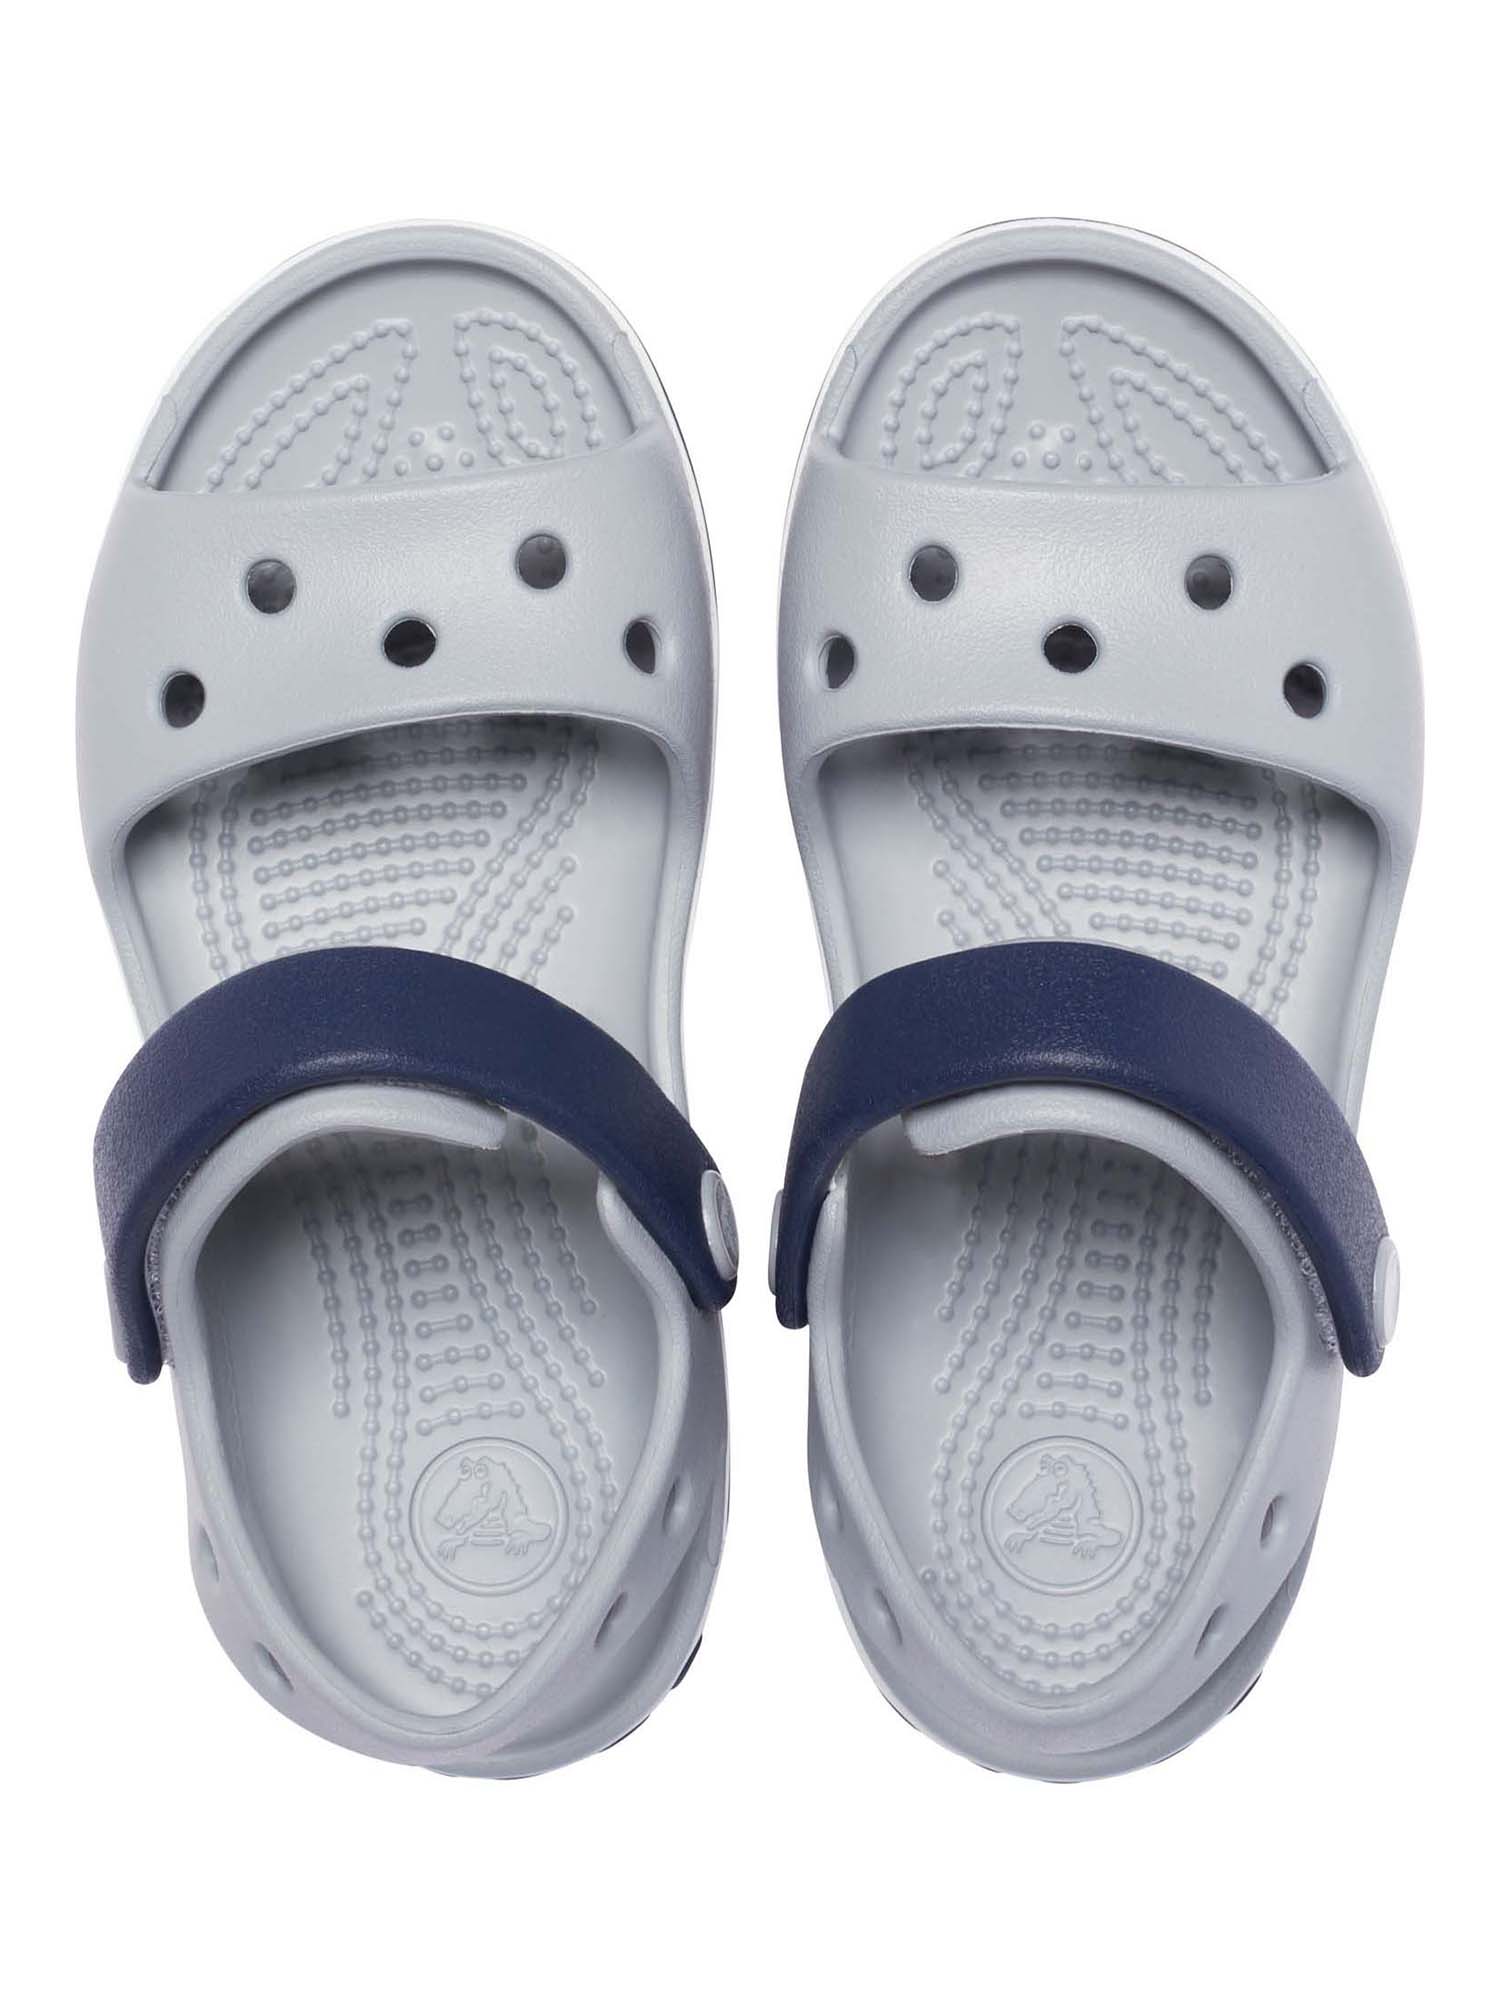 Crocs Toddler and Kids Crocband Cruiser Sandals, Sizes 4-3 - image 2 of 5